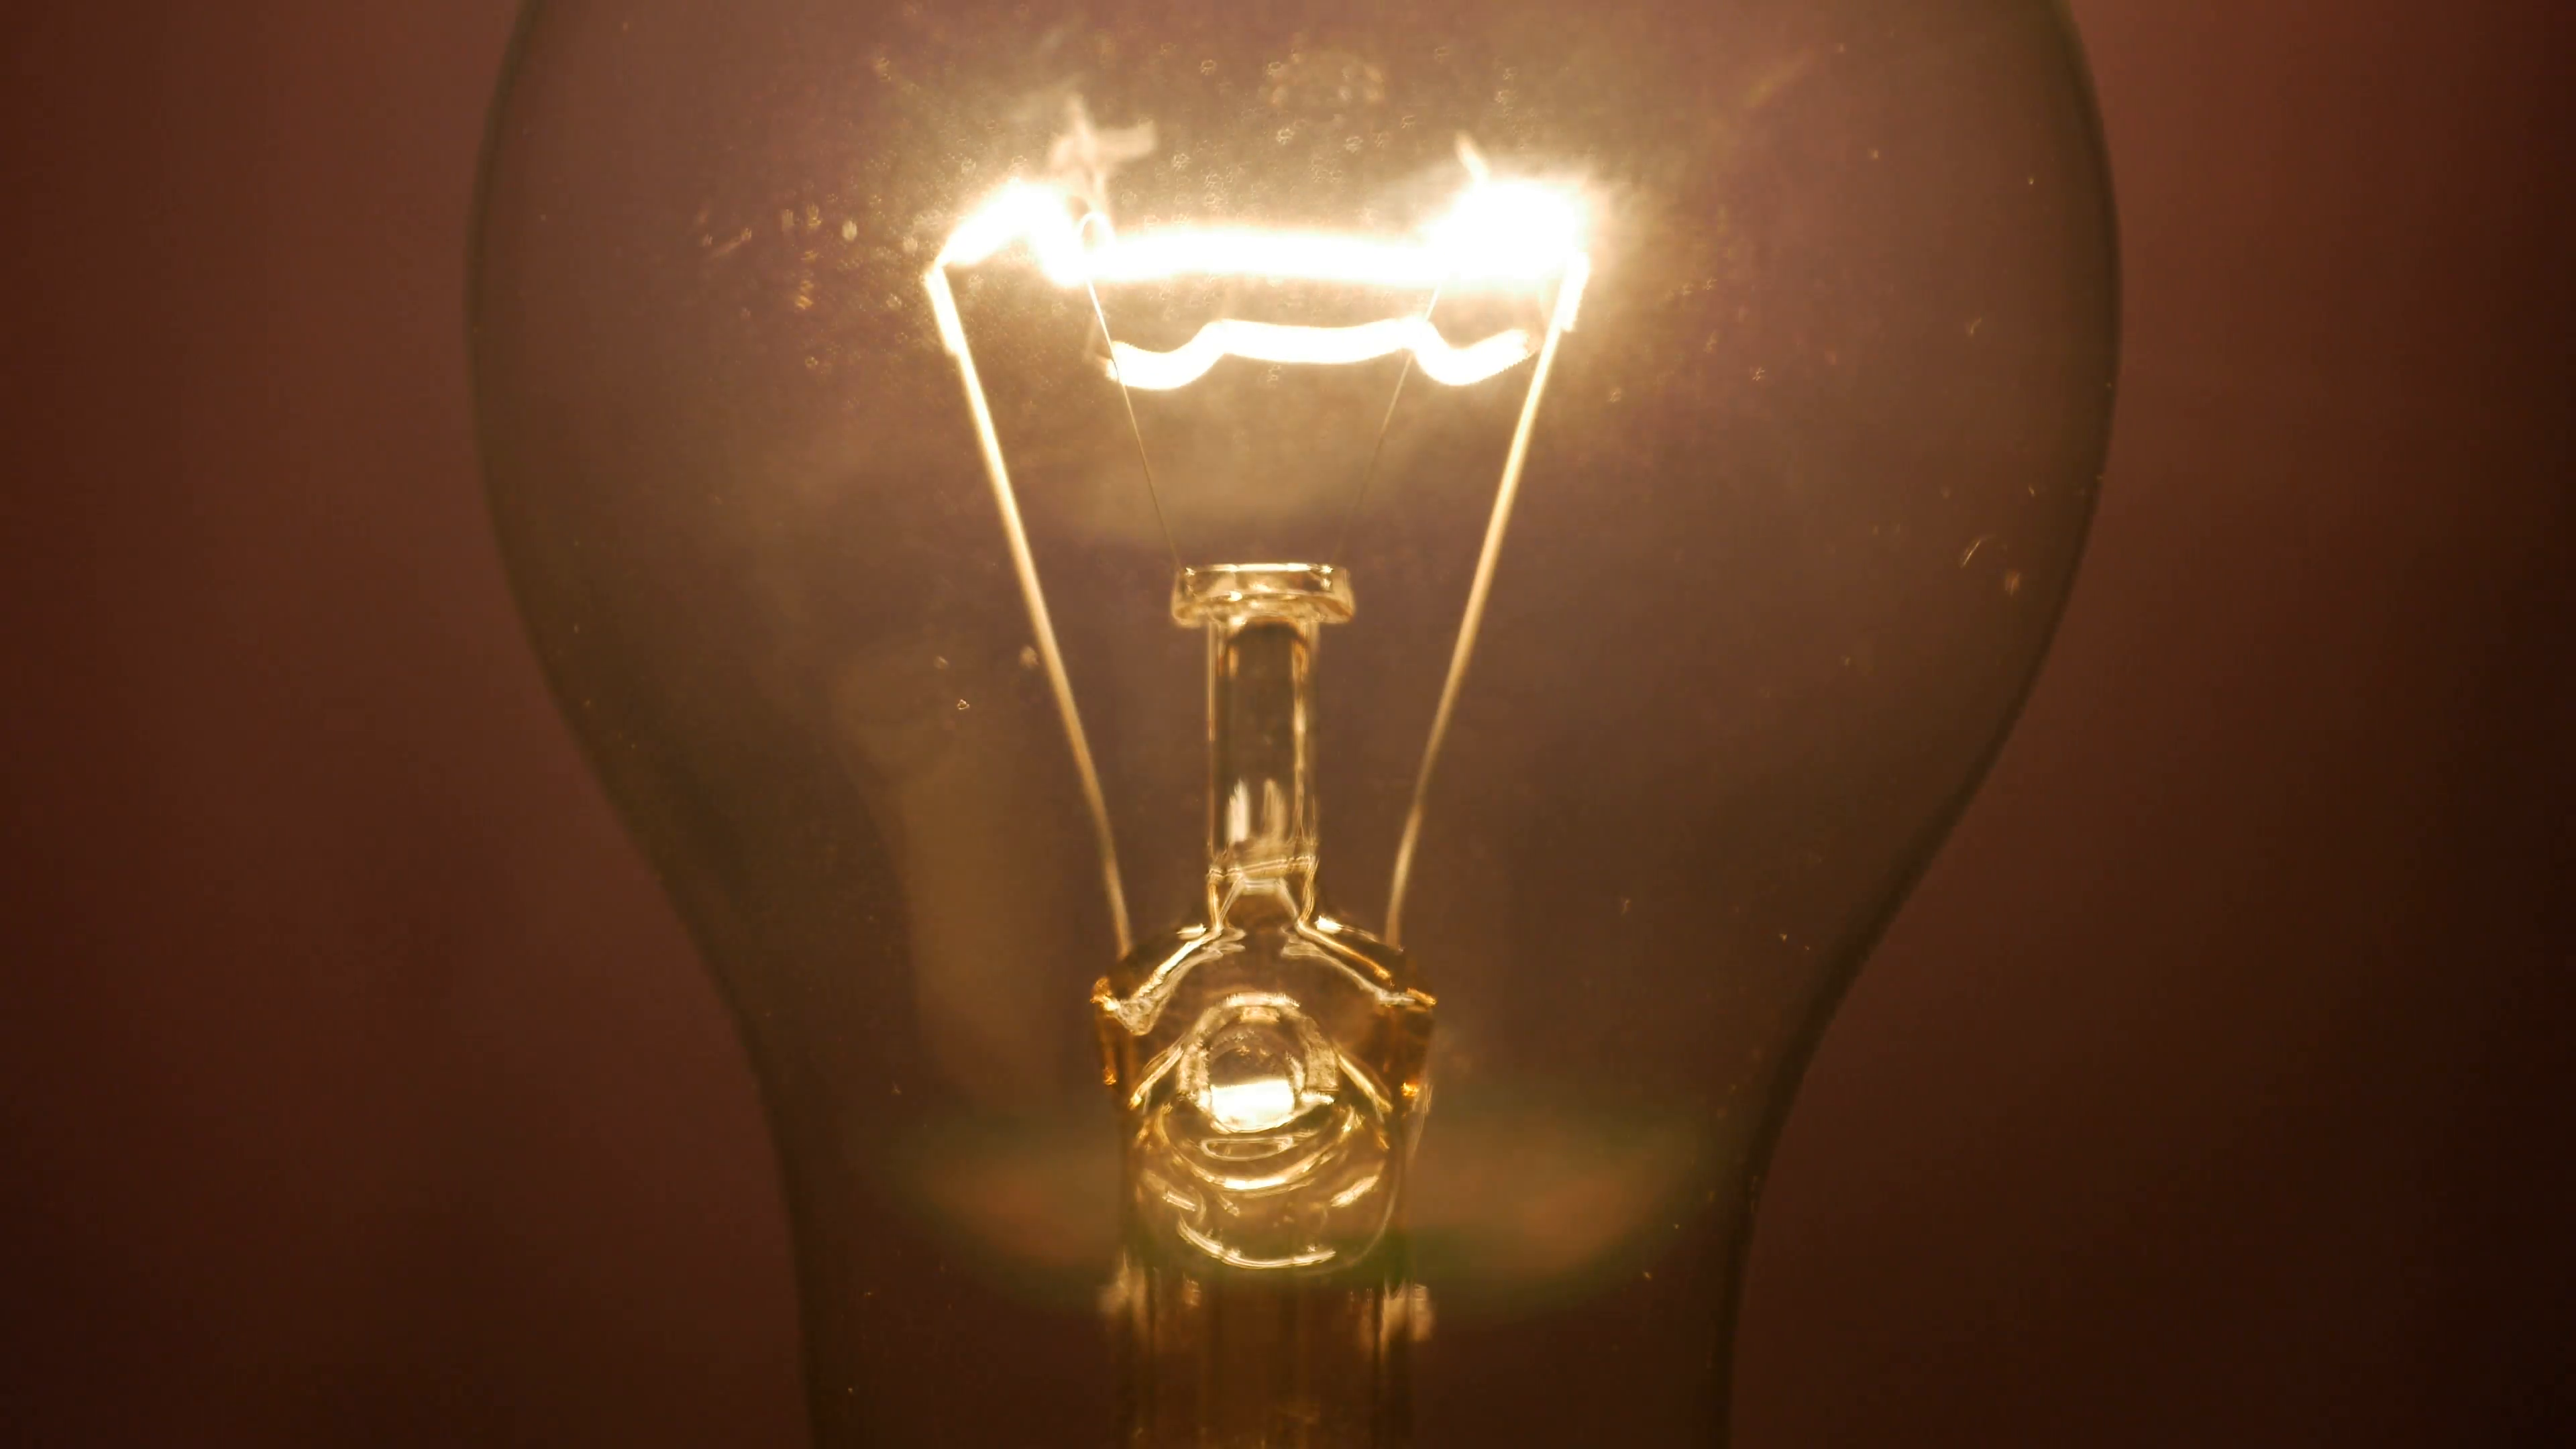 Flashing lamp bulb; light glowing incandescent filament . Detail of ...